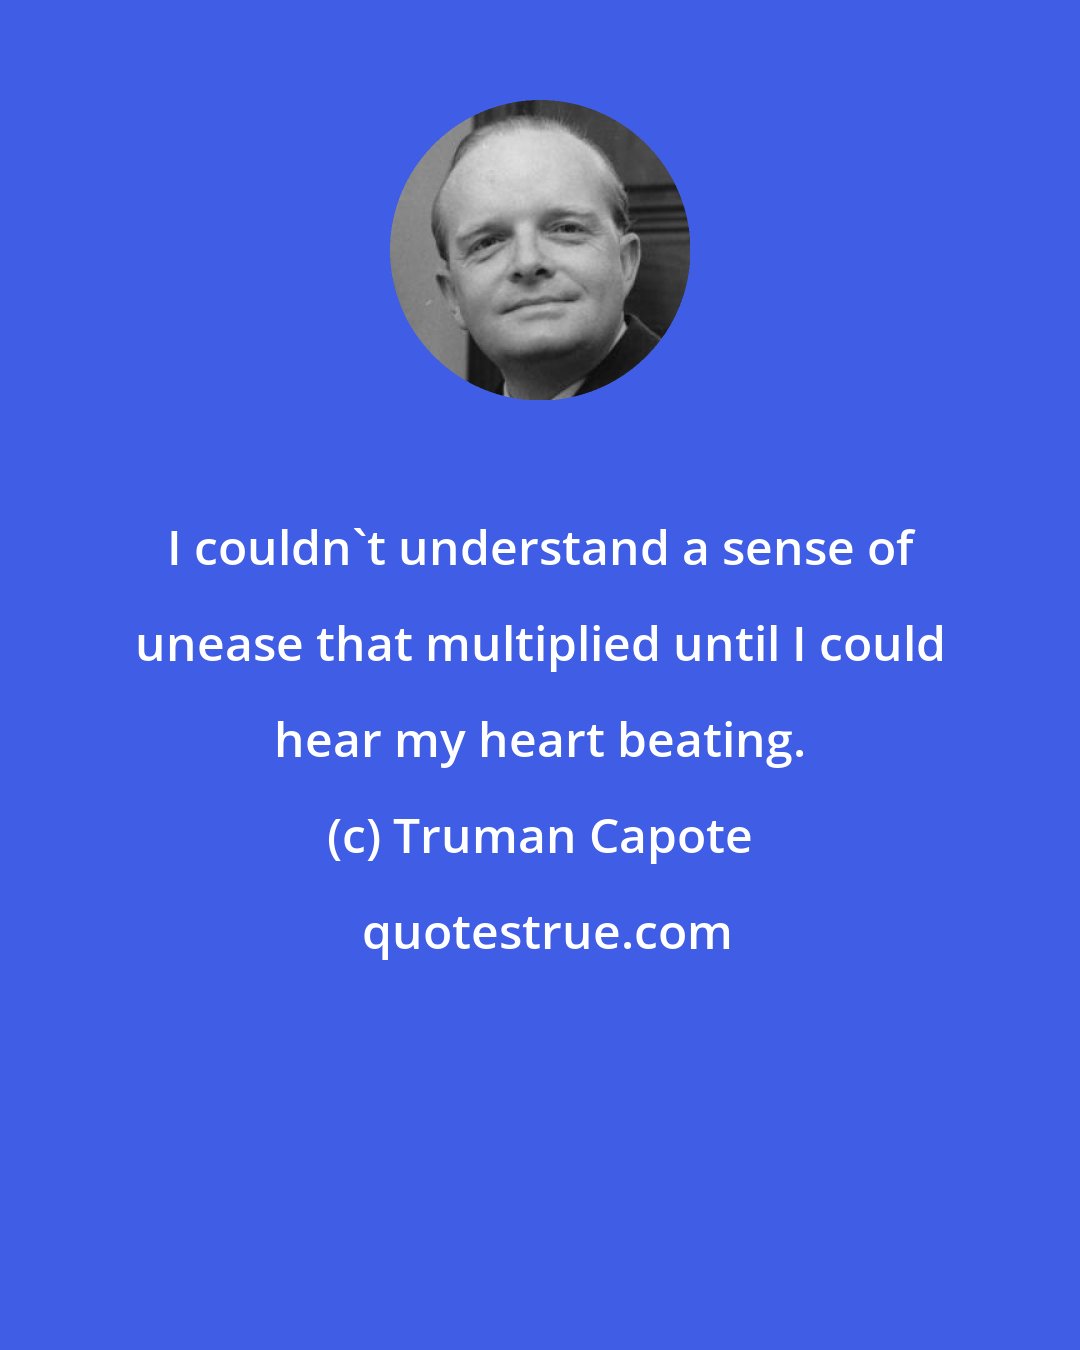 Truman Capote: I couldn't understand a sense of unease that multiplied until I could hear my heart beating.